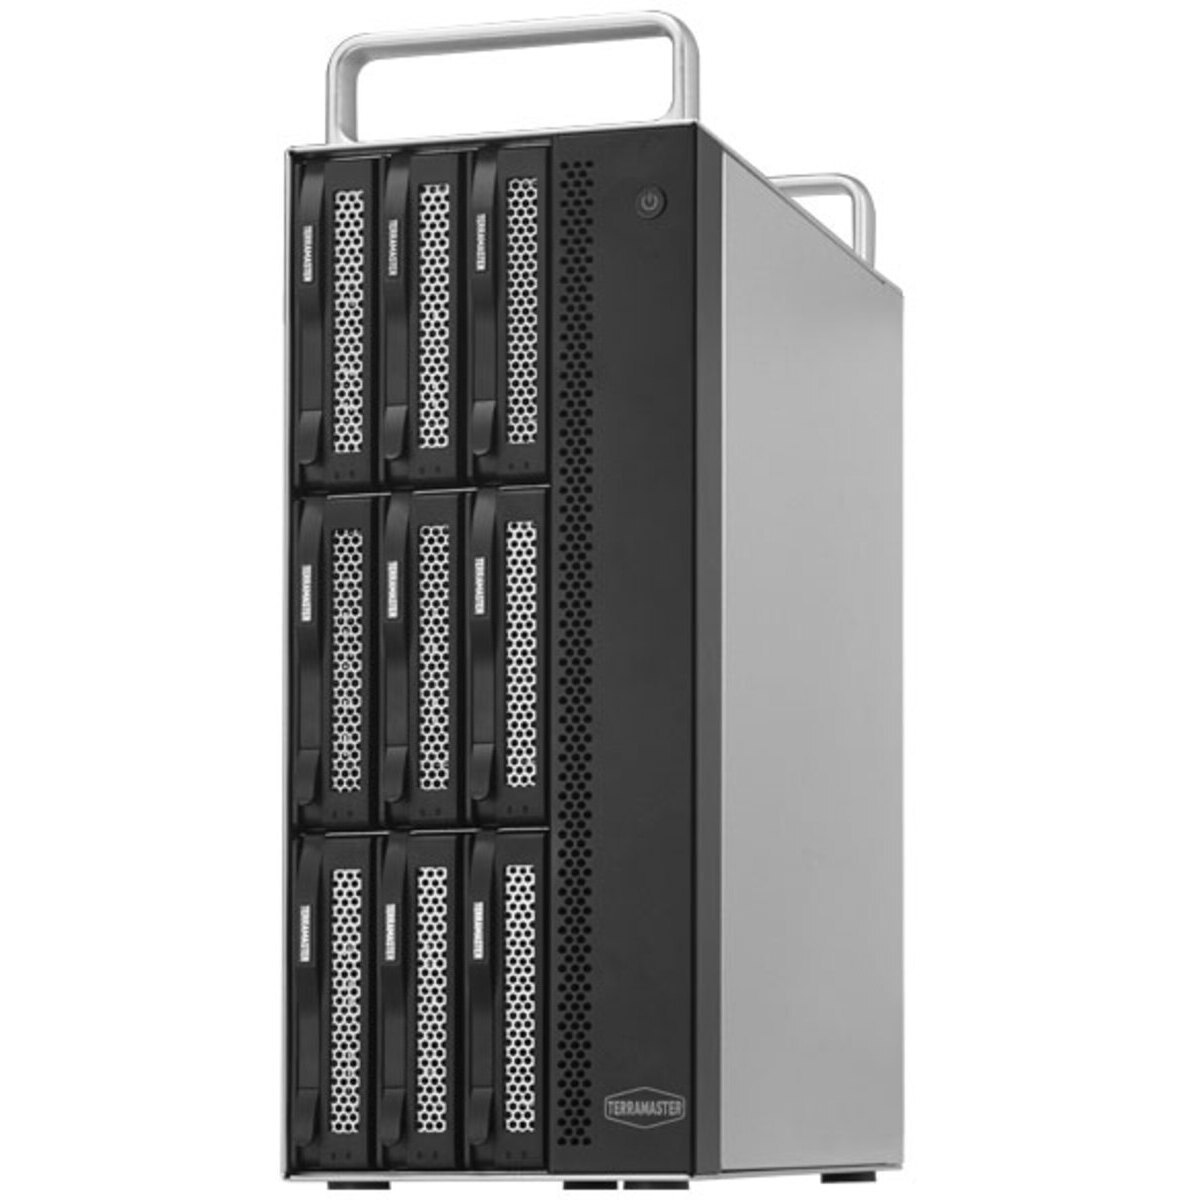 TerraMaster D8-322 96tb 8-Bay Desktop Multimedia / Power User / Business DAS - Direct Attached Storage Device 4x24tb Seagate EXOS X24 ST24000NM002H 3.5 7200rpm SATA 6Gb/s HDD ENTERPRISE Class Drives Installed - Burn-In Tested D8-322